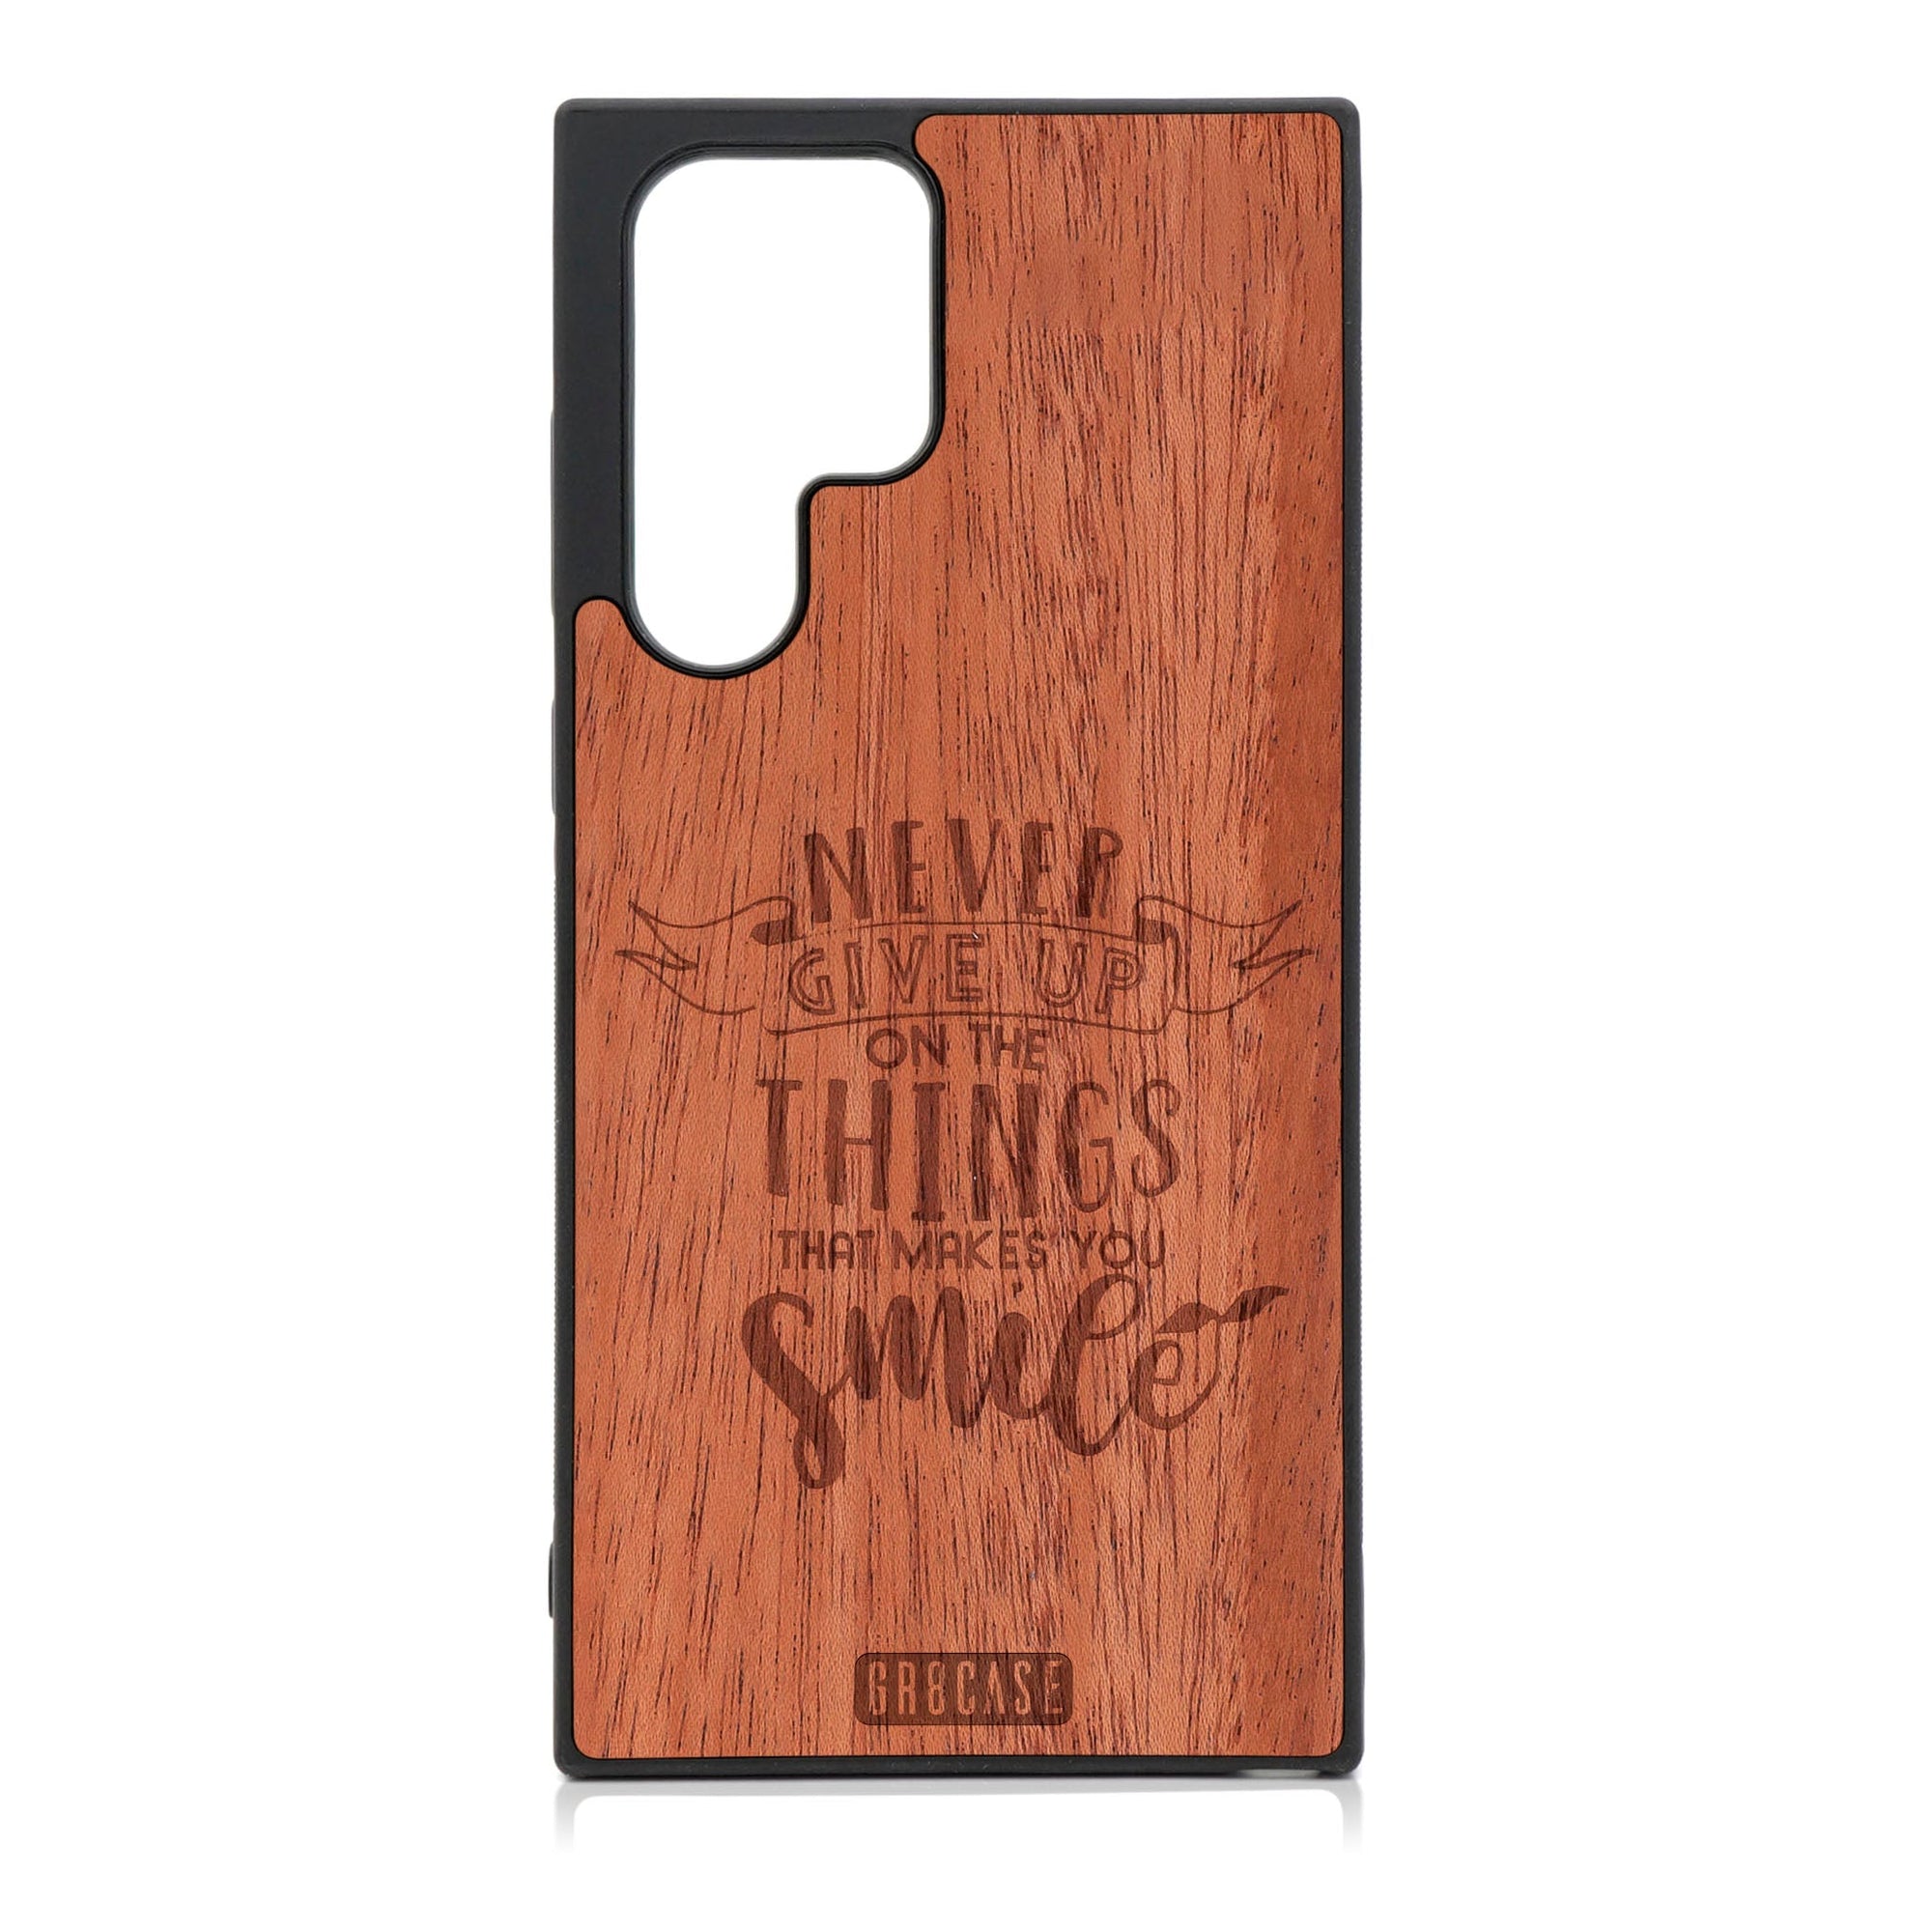 Never Give Up On The Things That Make You Smile Design Wood Case For Galaxy S23 Ultra